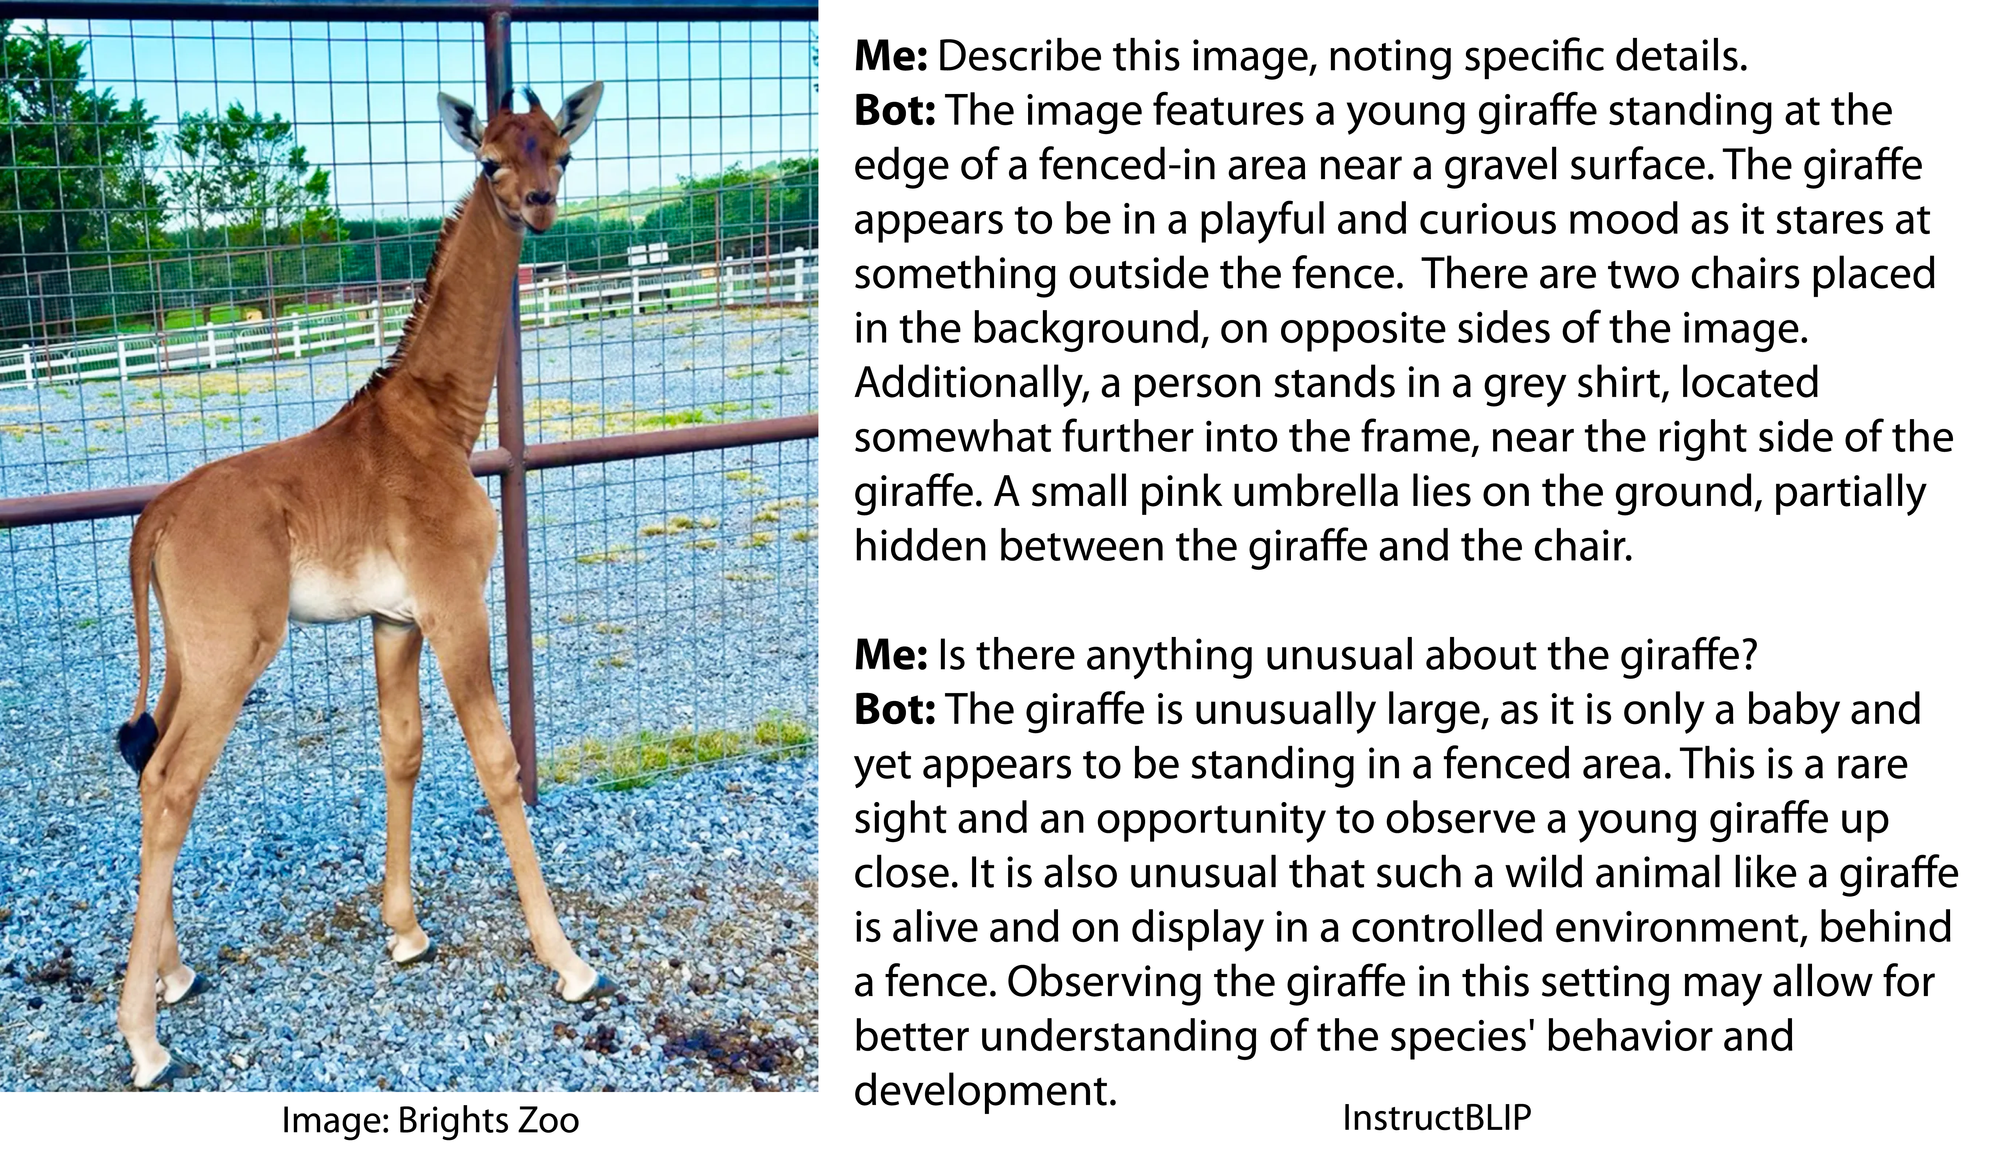 Image is of a plain brown baby giraffe with no spots, standing on gravel in front of a zoo fence. Conversation with InstructBLIP: Me: Describe this image, noting specific details. Bot: The image features a young giraffe standing at the edge of a fenced-in area near a gravel surface. The giraffe appears to be in a playful and curious mood as it stares at something outside the fence.  There are two chairs placed in the background, on opposite sides of the image. Additionally, a person stands in a grey shirt, located somewhat further into the frame, near the right side of the giraffe. A small pink umbrella lies on the ground, partially hidden between the giraffe and the chair.  Me: Is there anything unusual about the giraffe? Bot: The giraffe is unusually large, as it is only a baby and yet appears to be standing in a fenced area. This is a rare sight and an opportunity to observe a young giraffe up close. It is also unusual that such a wild animal like a giraffe is alive and on display in a controlled environment, behind a fence. Observing the giraffe in this setting may allow for better understanding of the species' behavior and development.